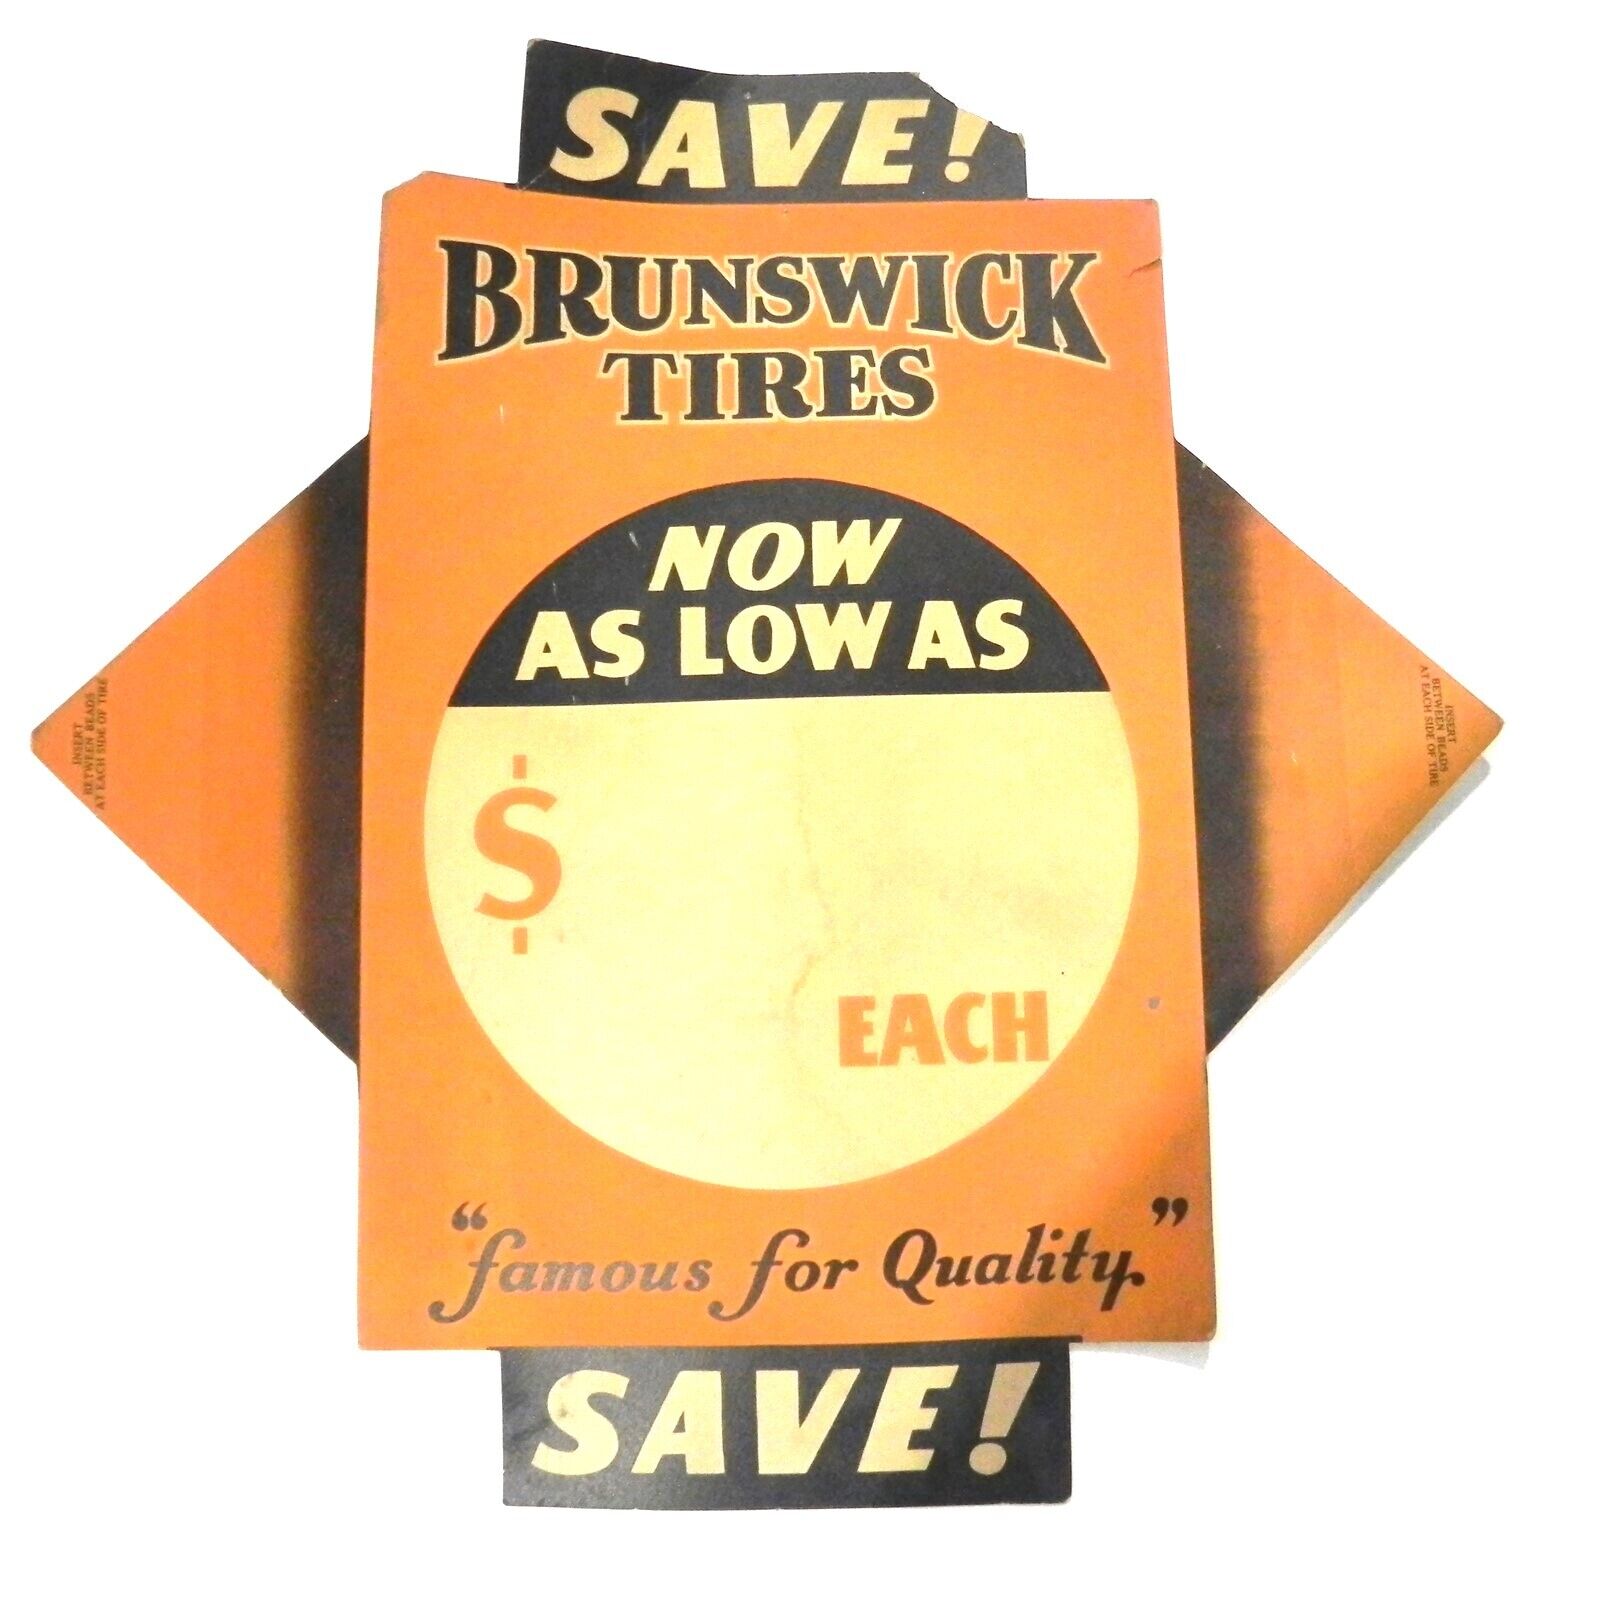 1920's 30's BRUNSWICK TIRES SIGN PAPER BOARD RARE SOME DAMAGE TEAR 2'x2' COOL